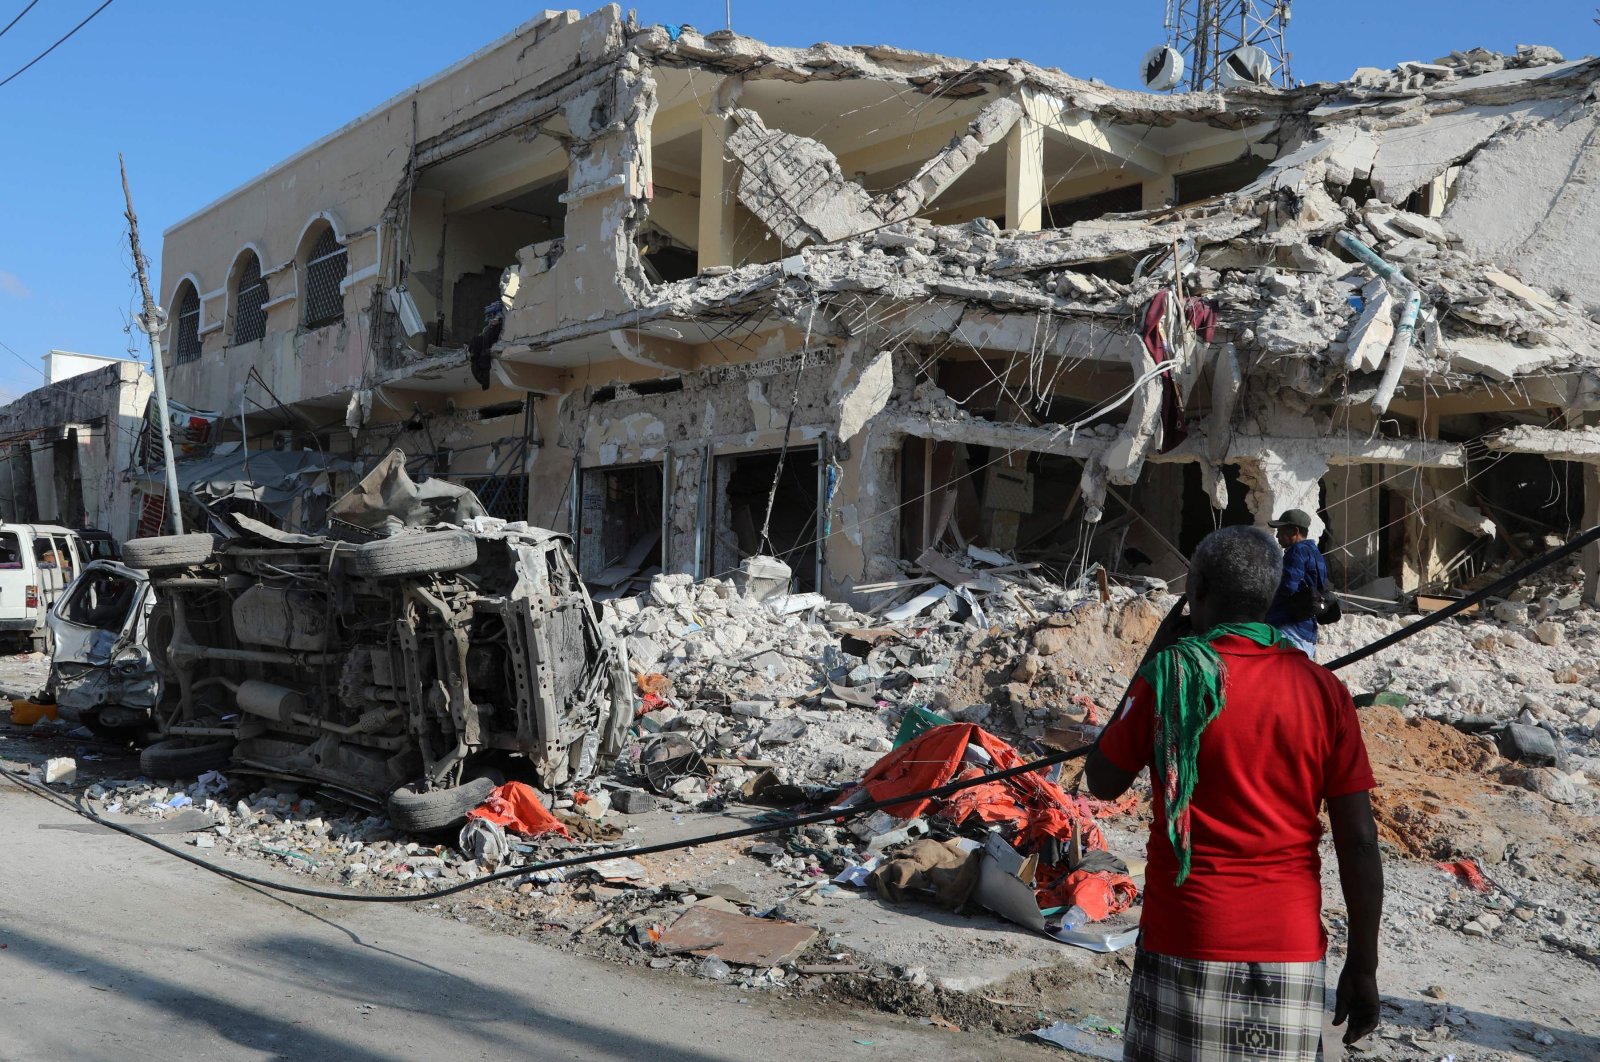 Locals look at the debris from a destroyed building in Mogadishu, Somalia, Oct. 30, 2022. (AFP Photo)